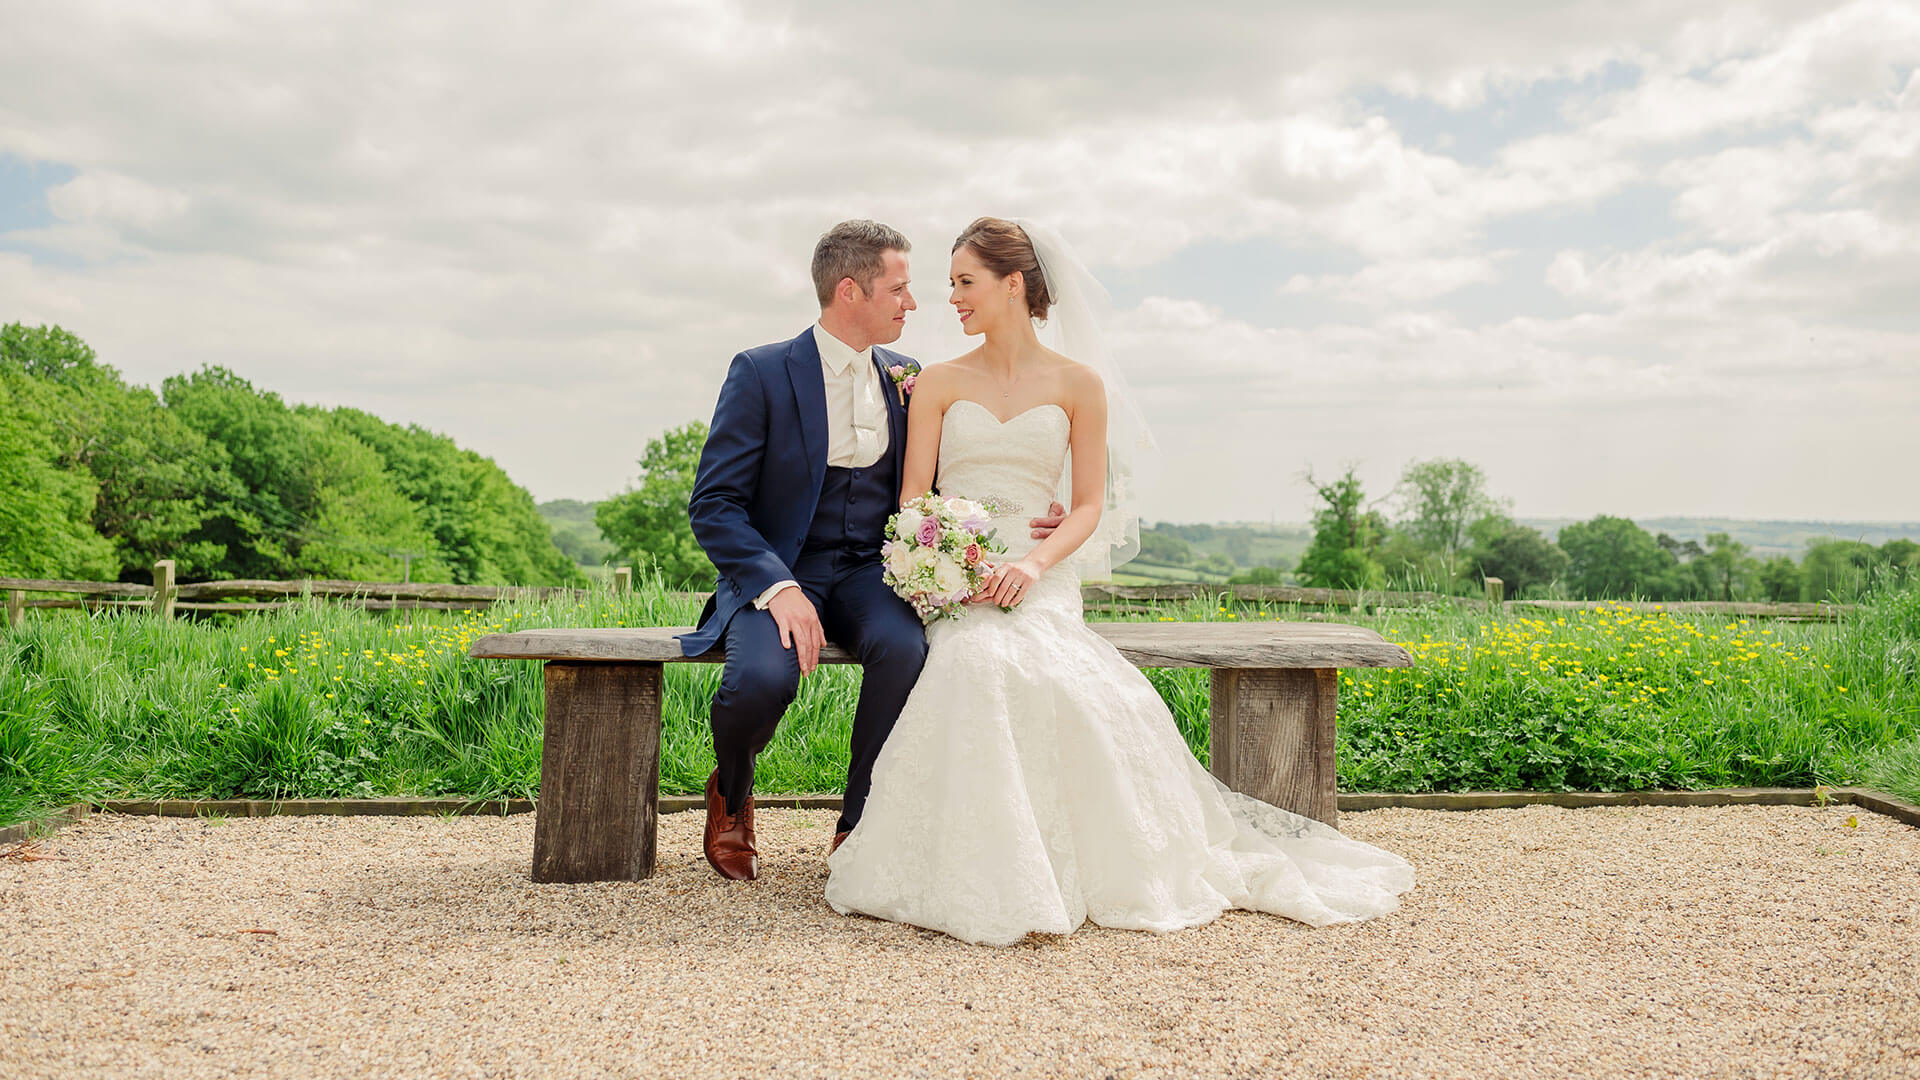 A happy couple share a moment together at this gorgeous country wedding venue in Essex